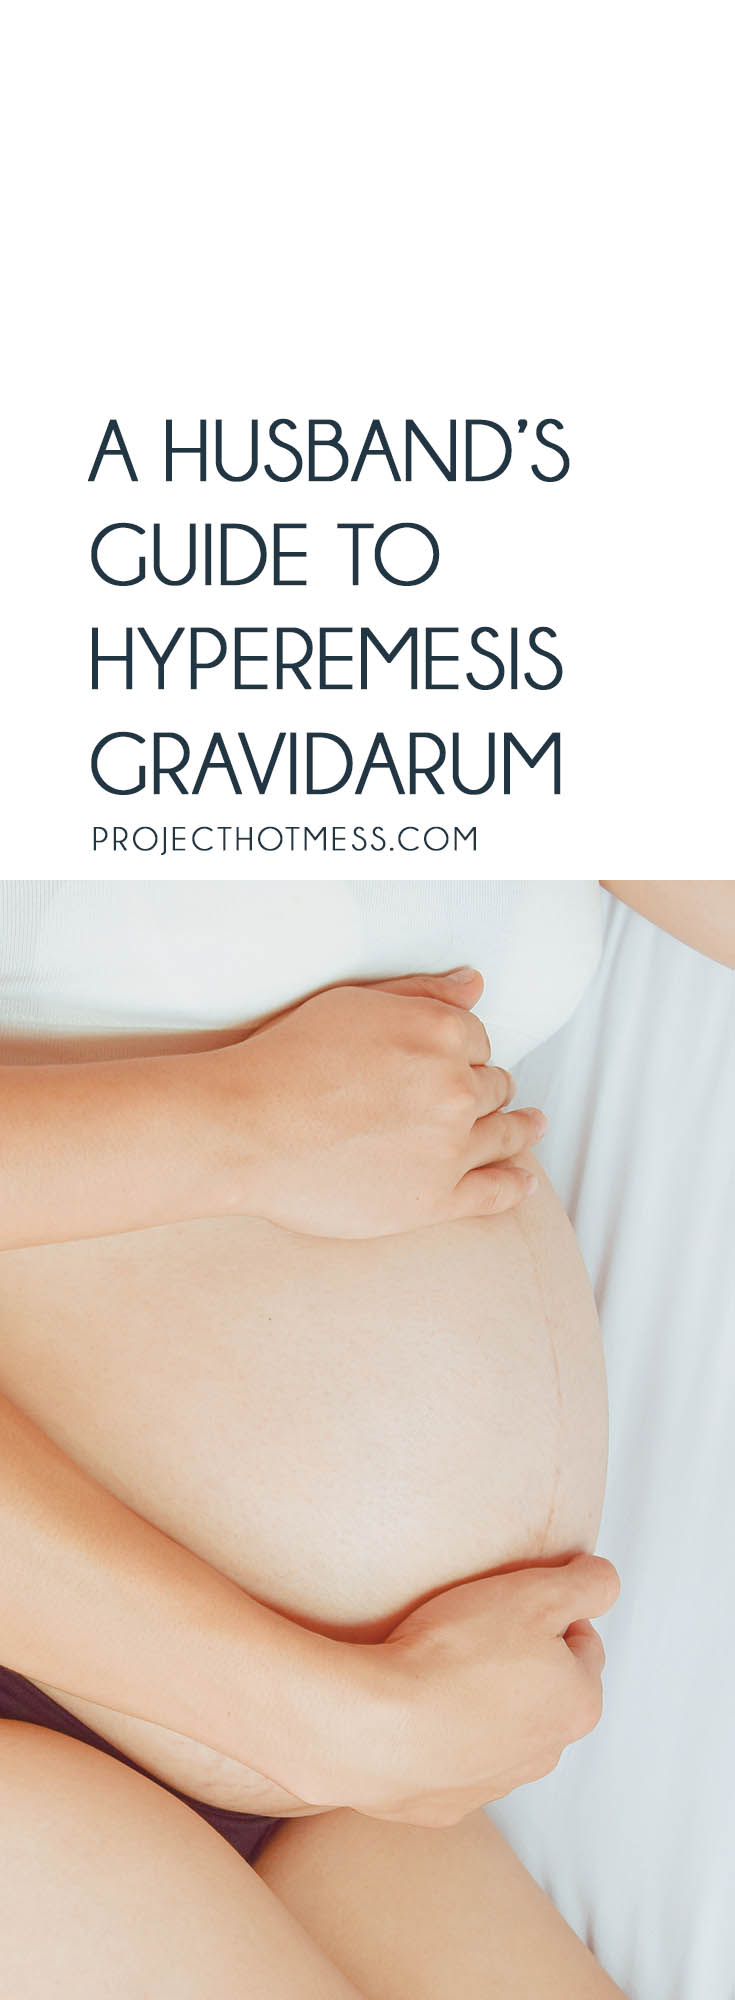 If your wife is suffering from Hyperemesis Gravidarum during her pregnancy, it might be tough to know what to do. Here's how this husband suggests to cope. 